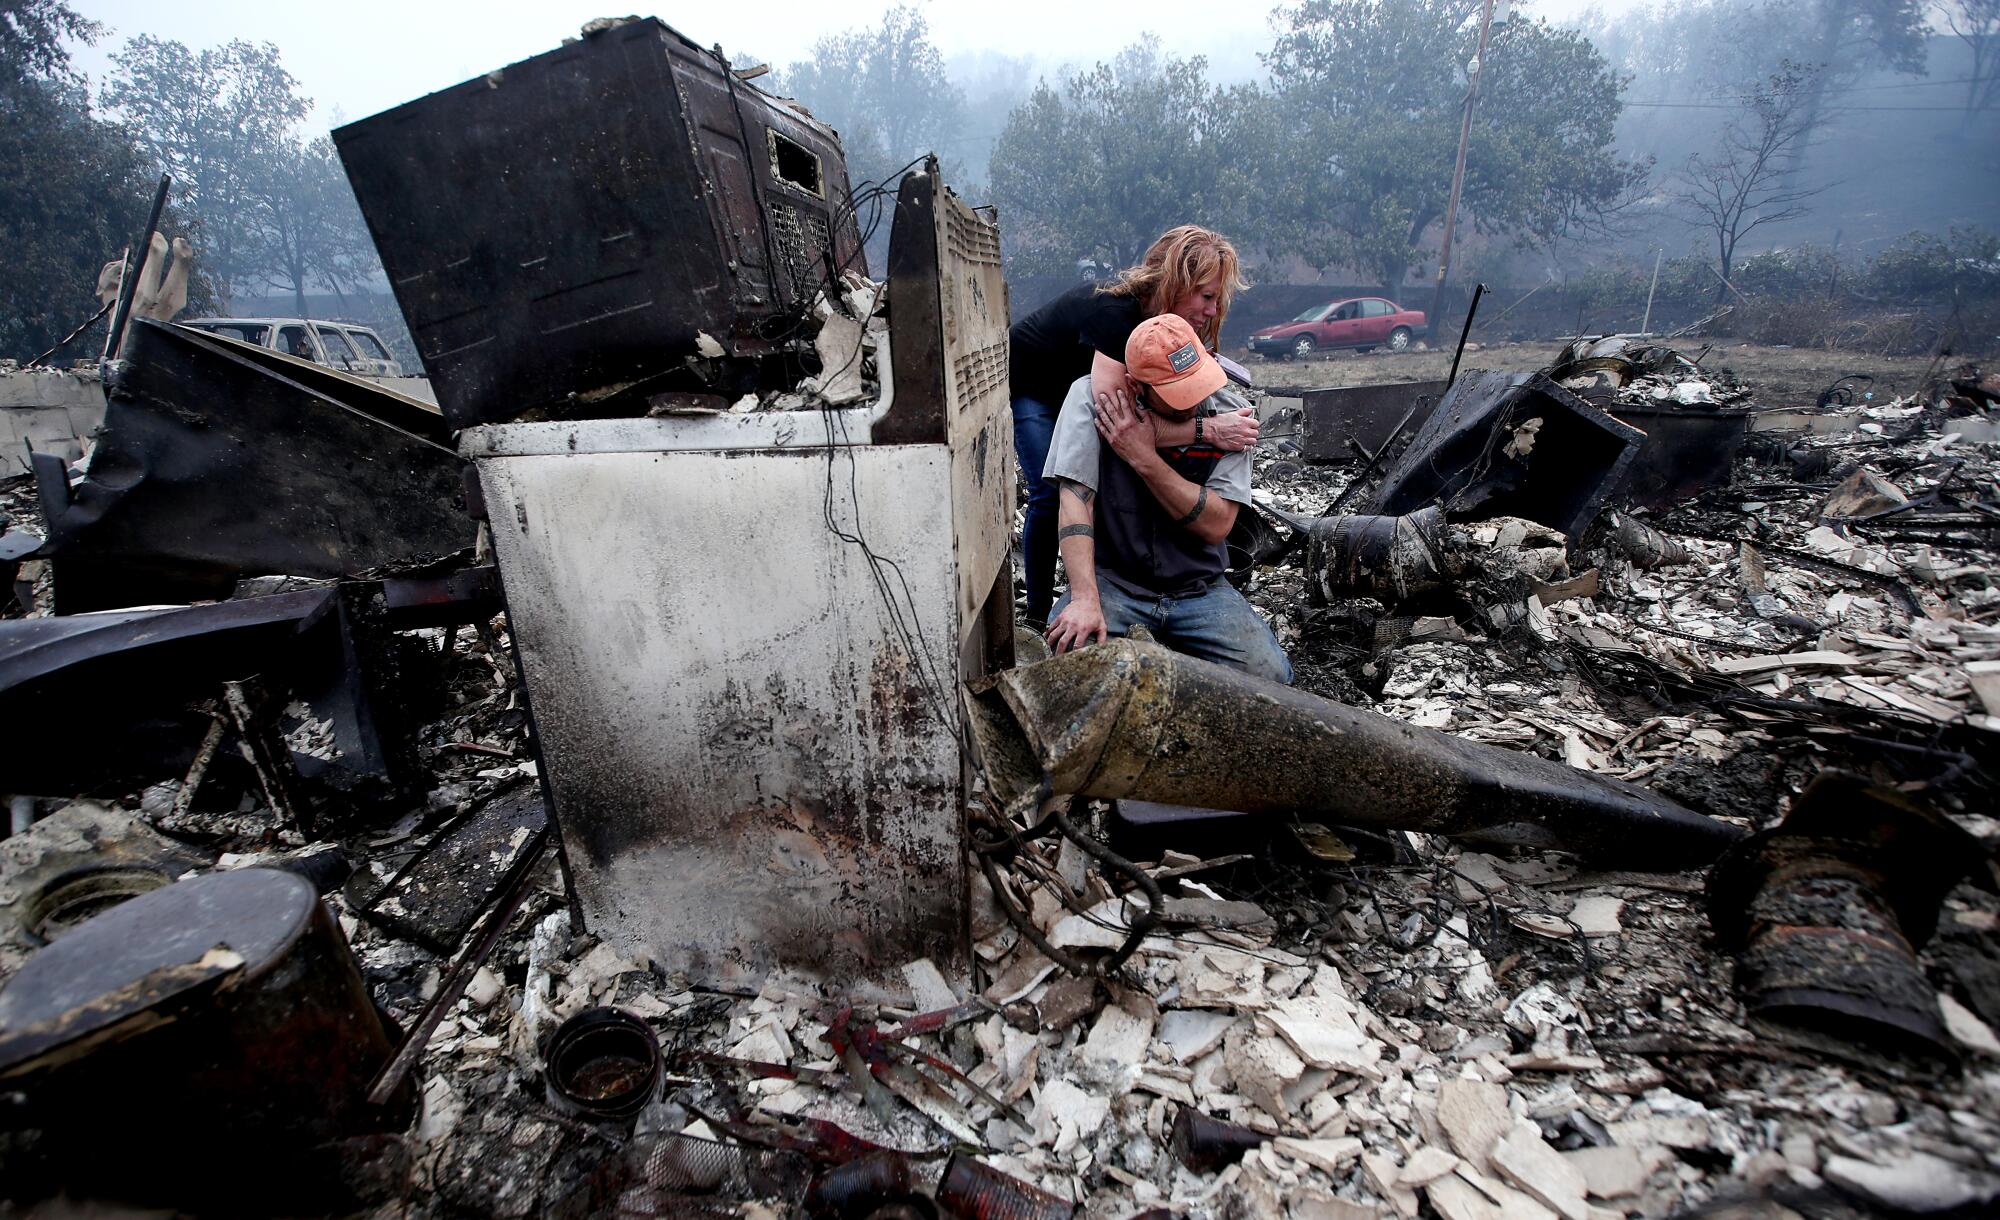 Sheri Marchetti-Perrault and James Benton embrace as they sift through the remains of their home near Yreka, Calif.